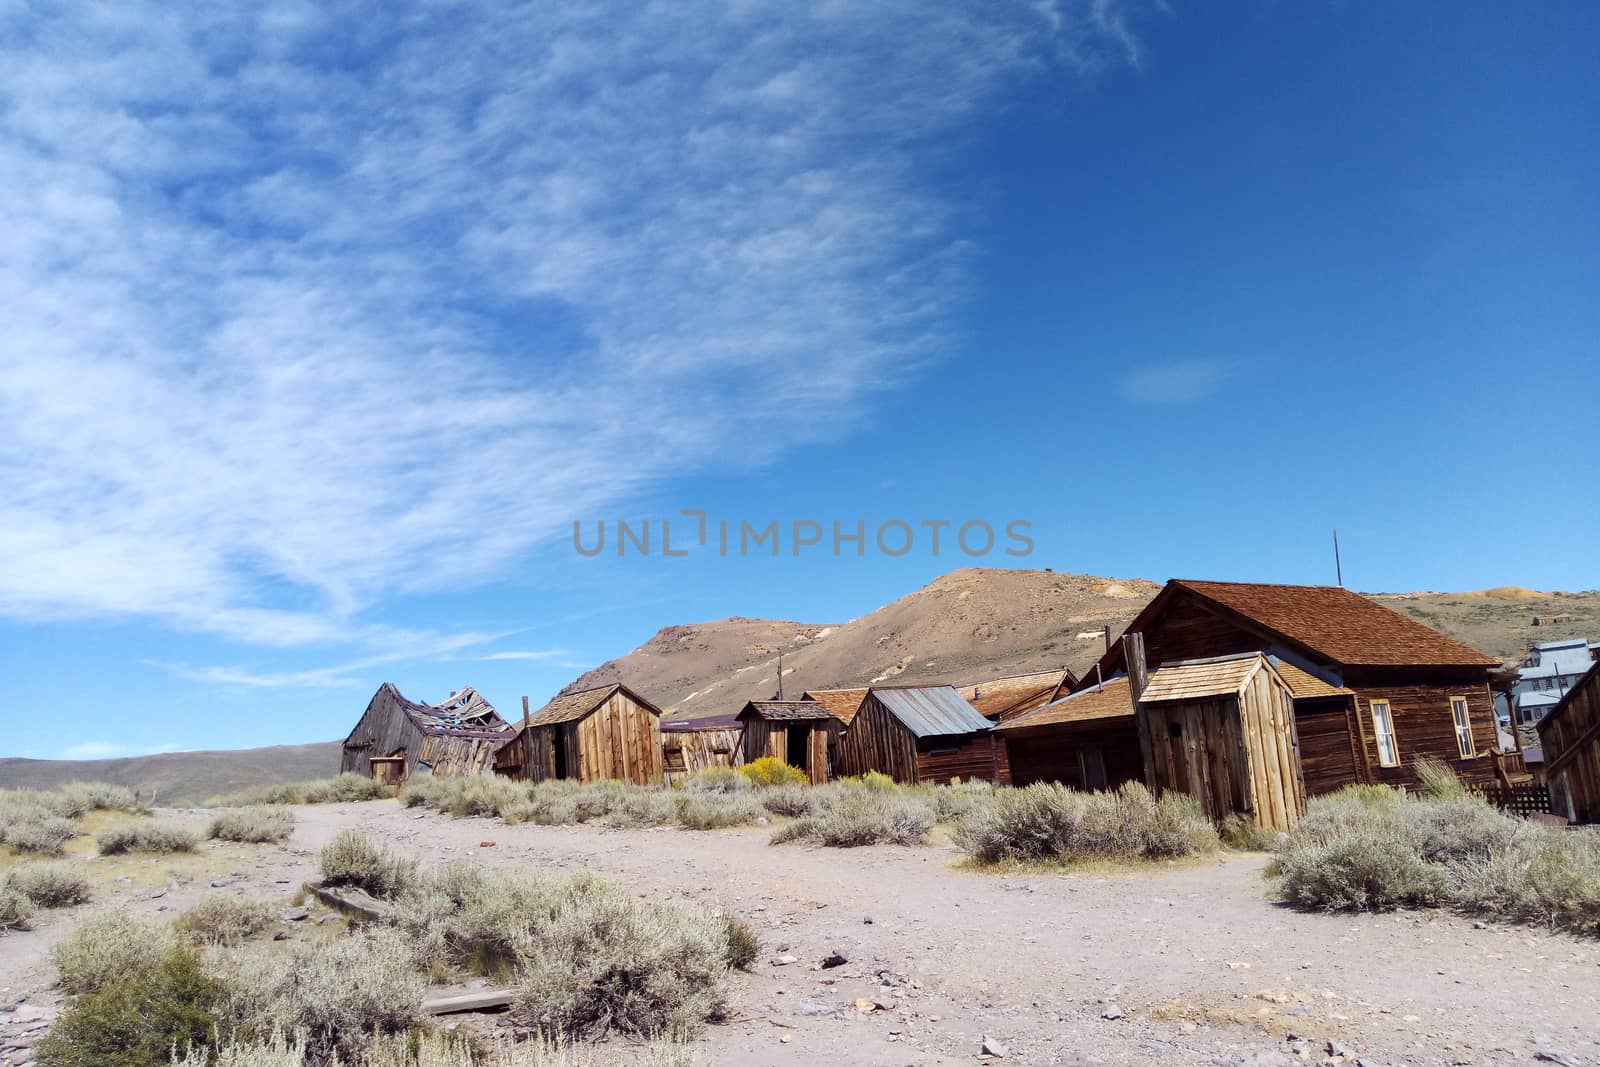 Lost Ghost Town of Bodie California, USA by kip02kas